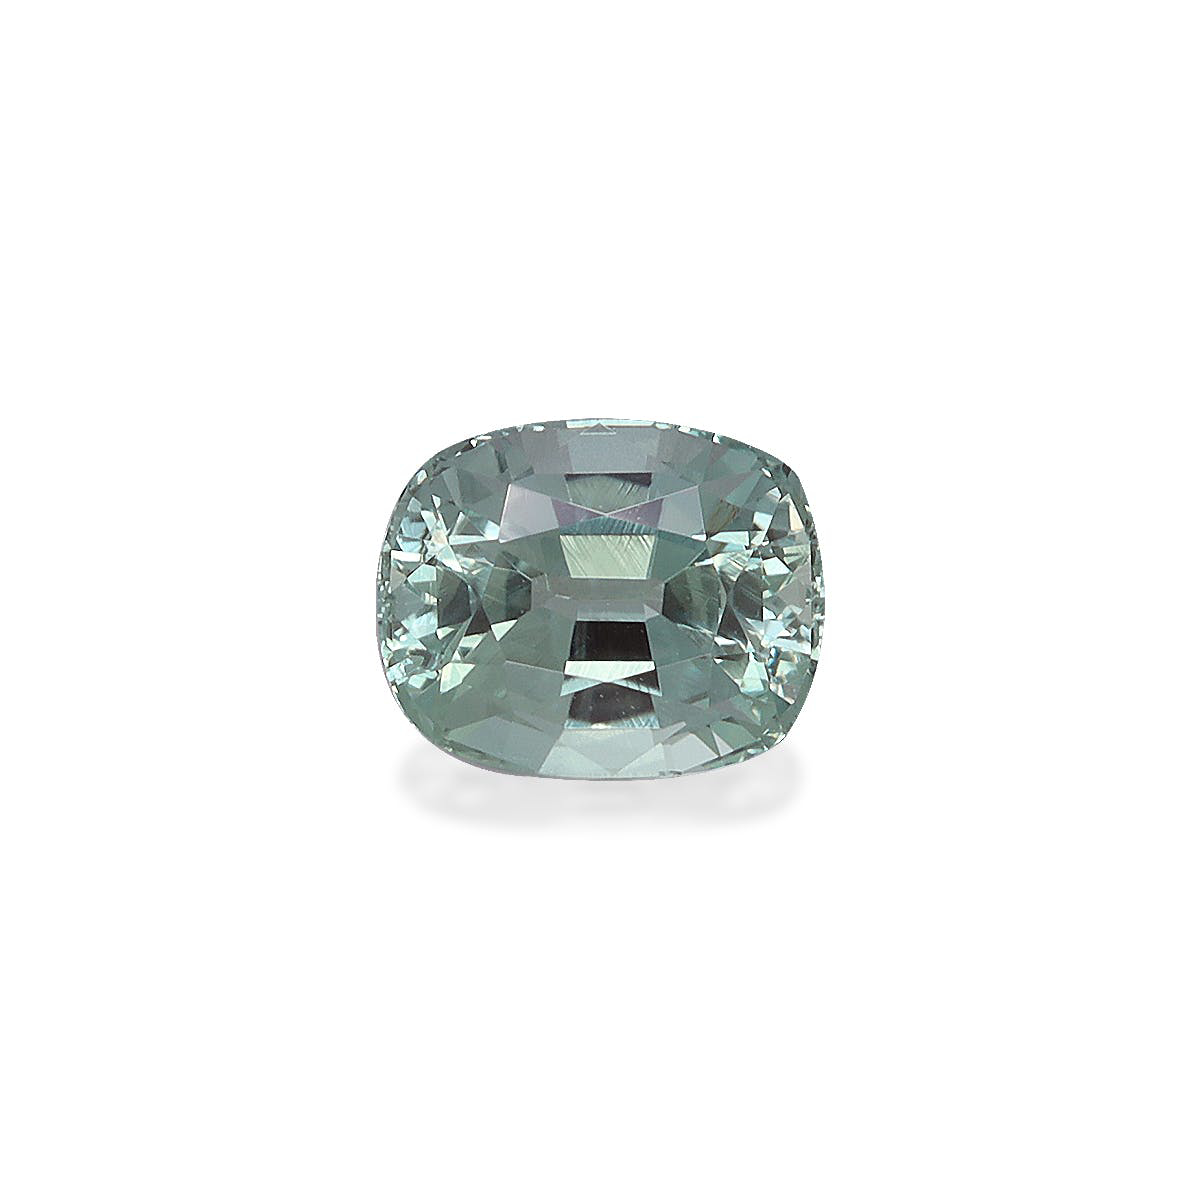 Picture of Color Change Green Alexandrite 0.98ct - 6x4mm (AL0089)